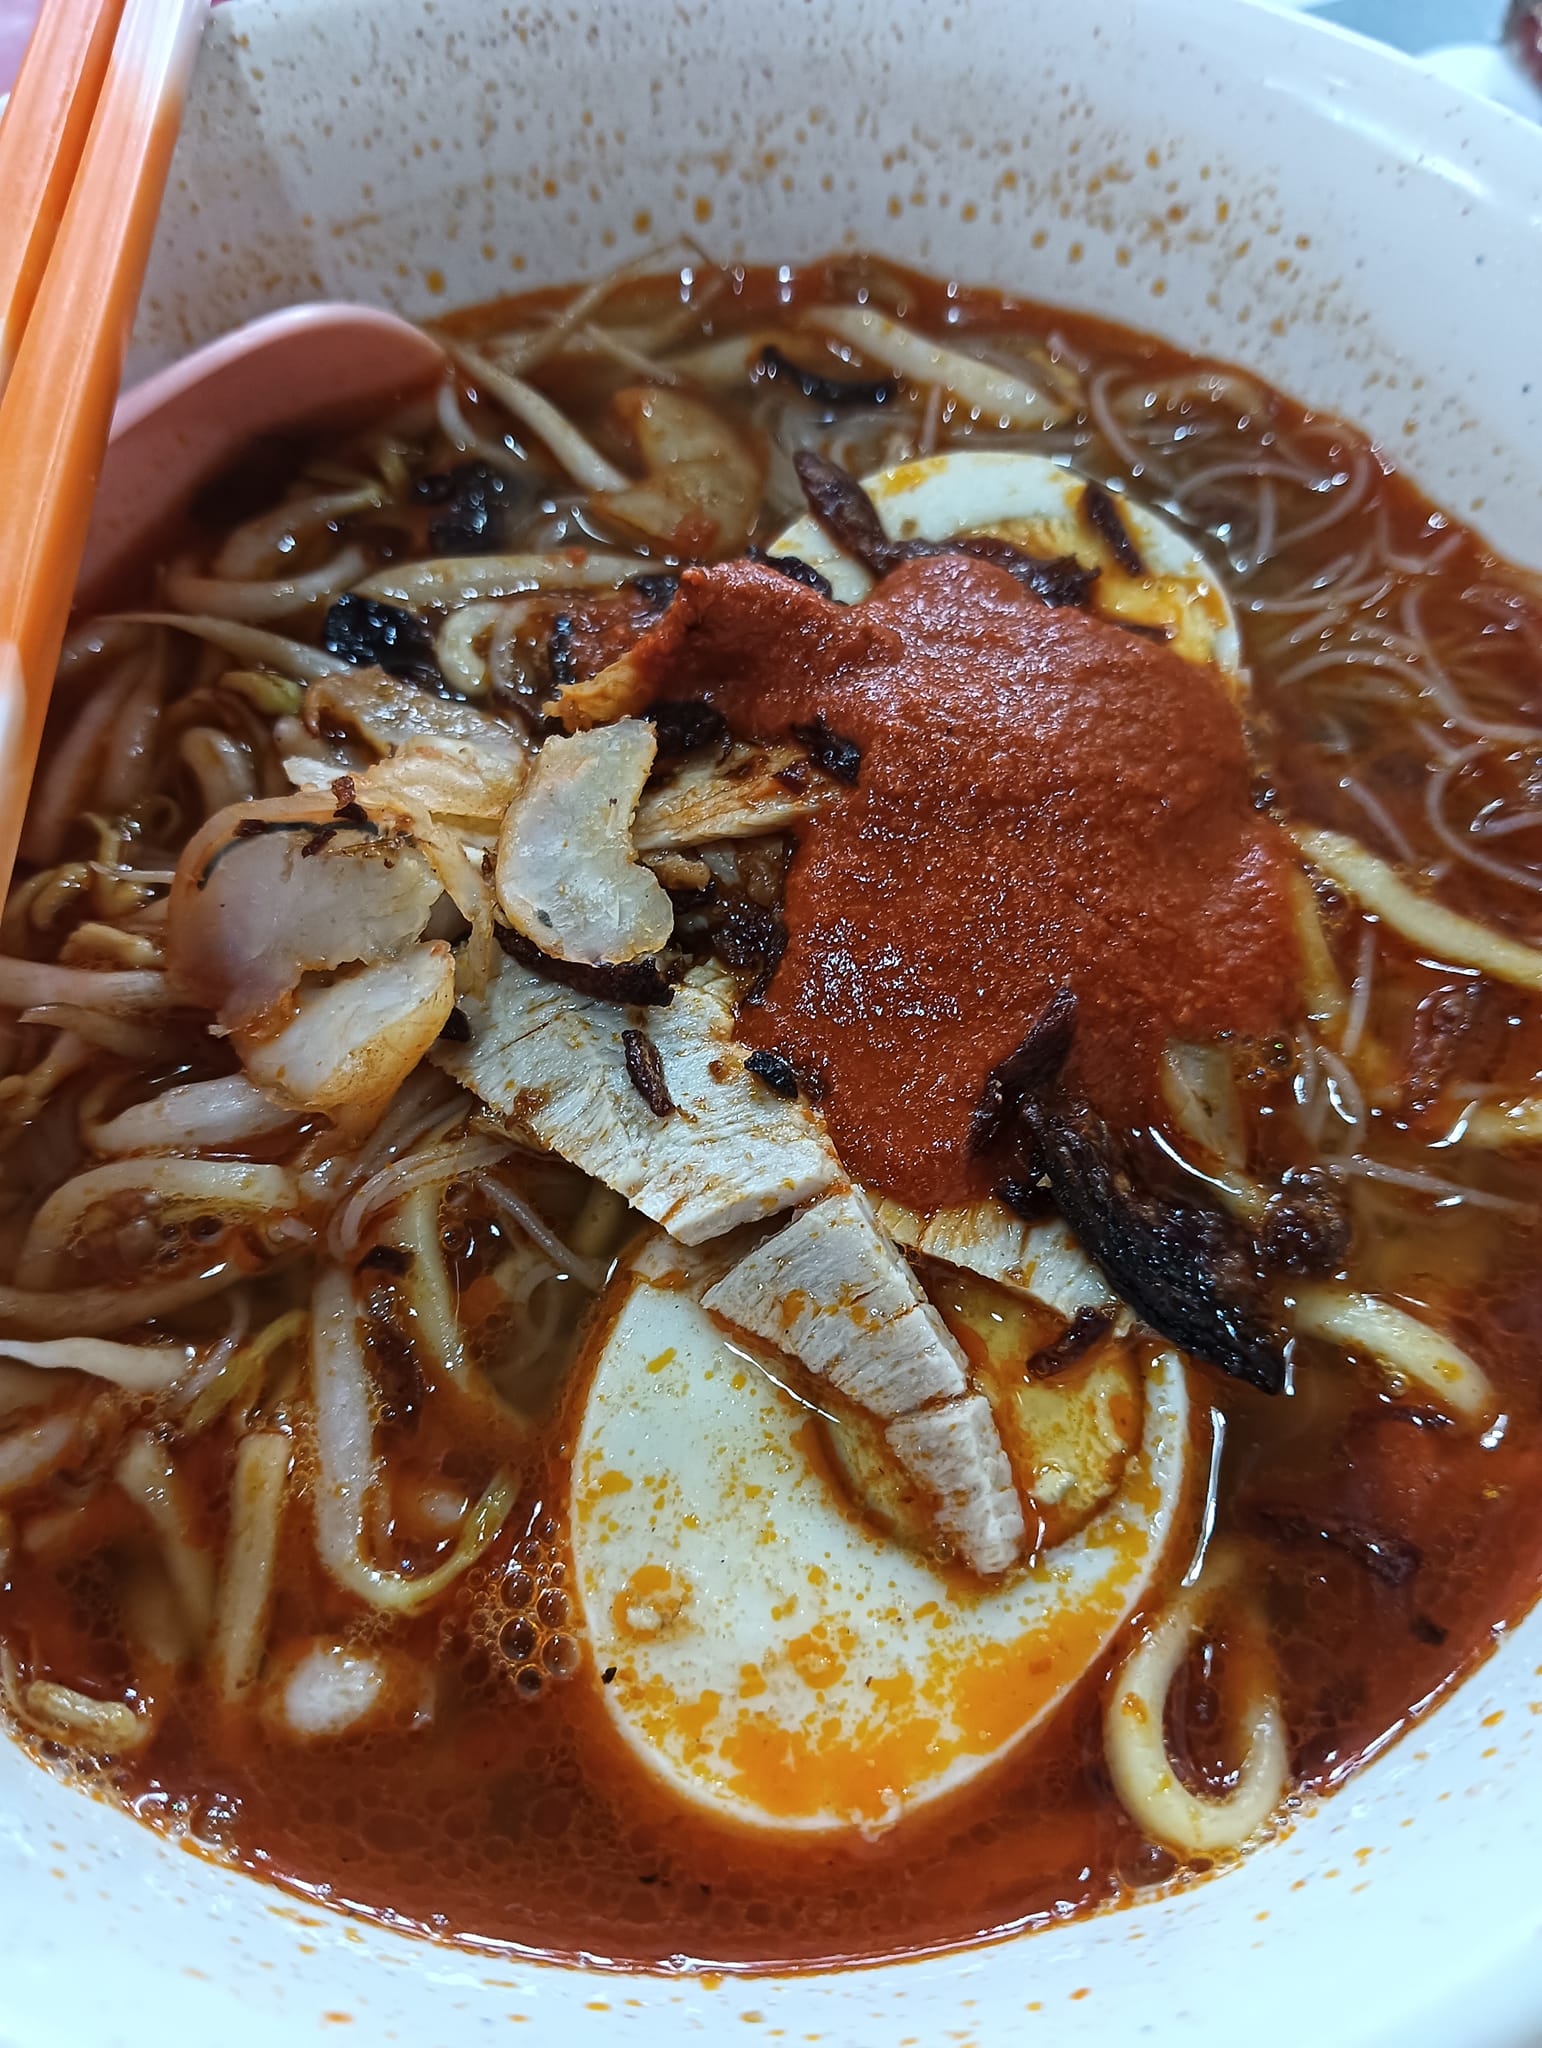 Tanjung Bungah Market Food Court Hokkien Mee and others | Chiefeater.com